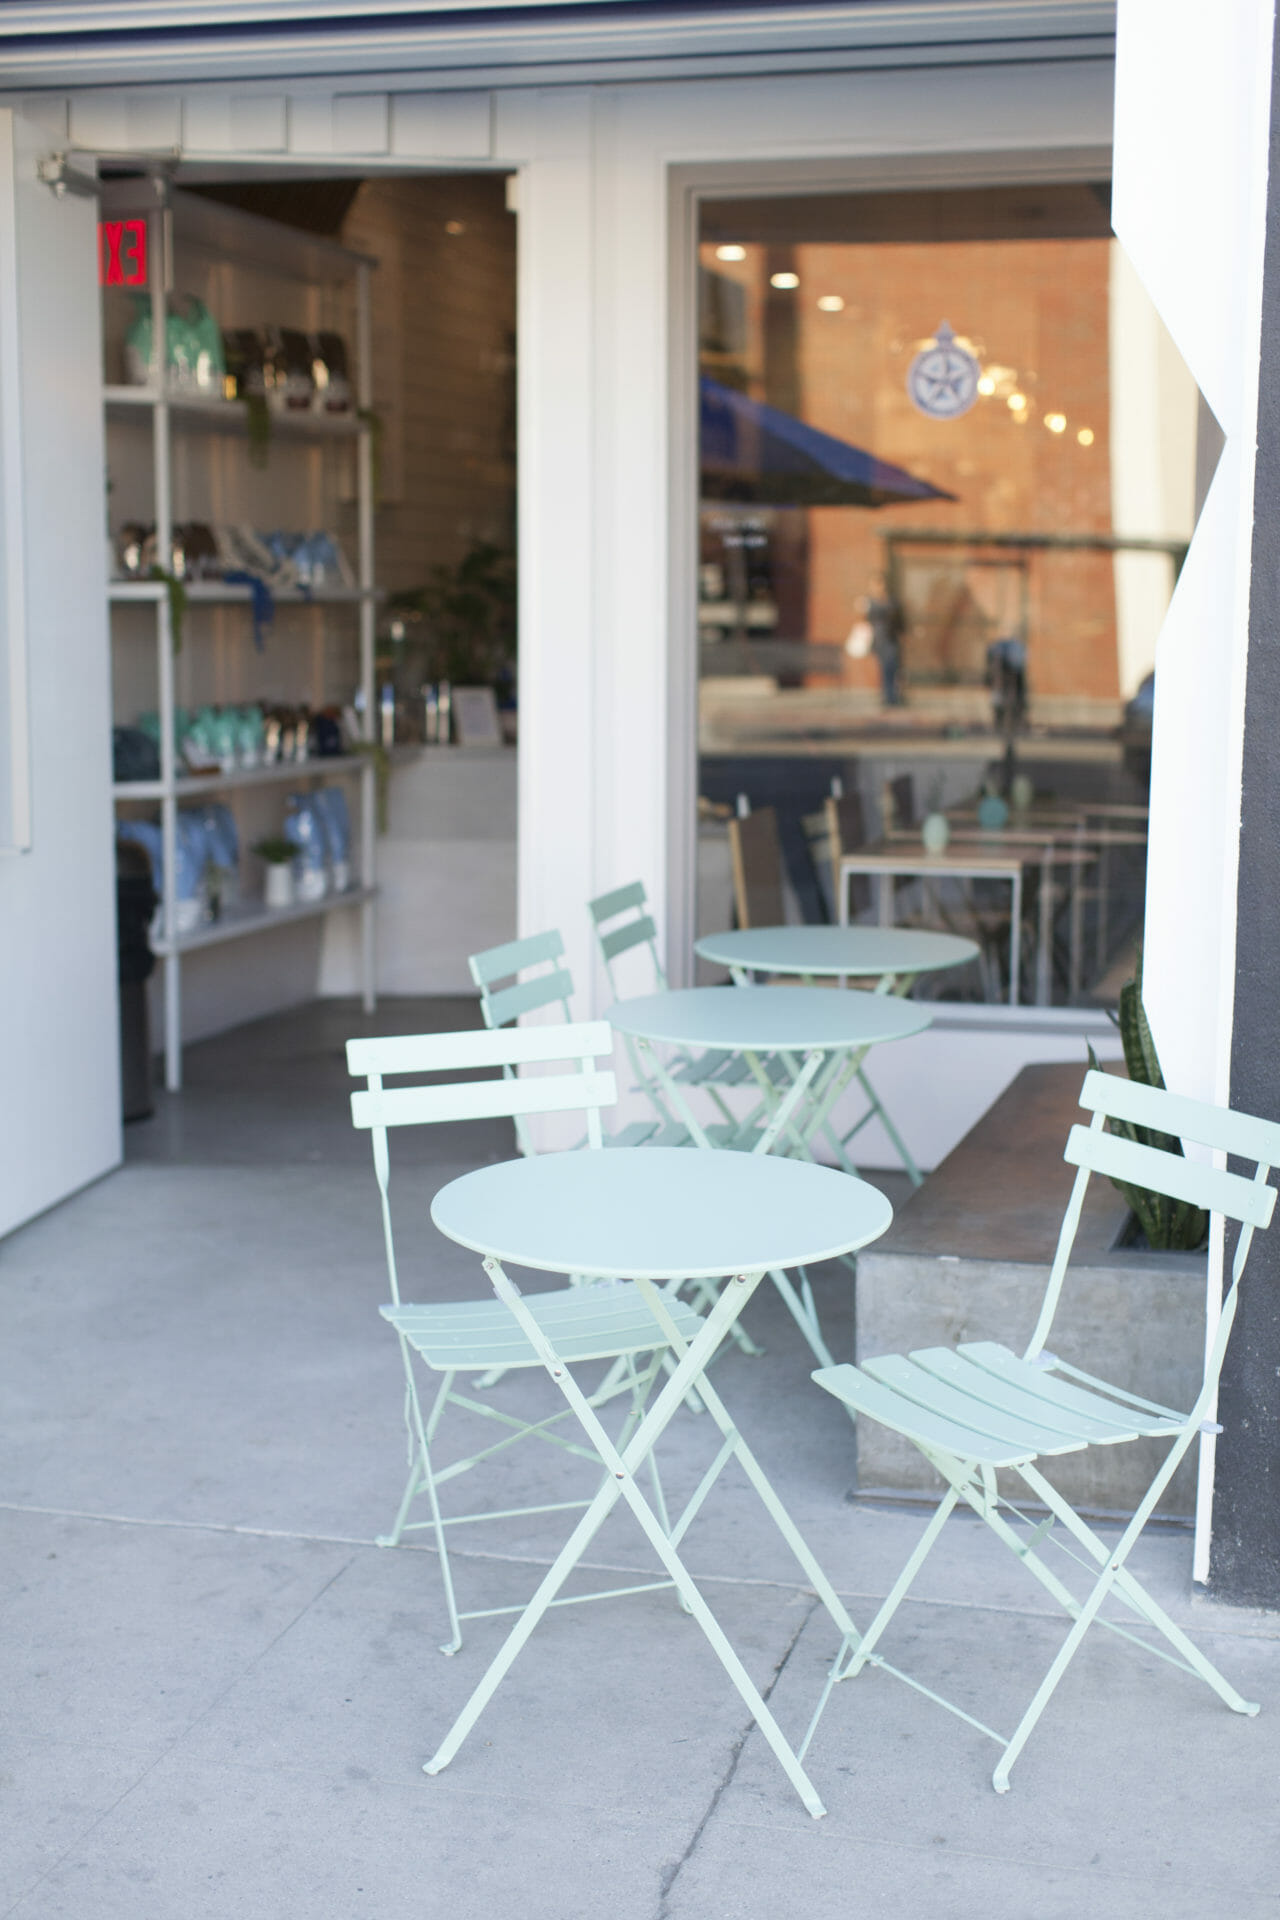 exterior shot with teal tables and chairs.